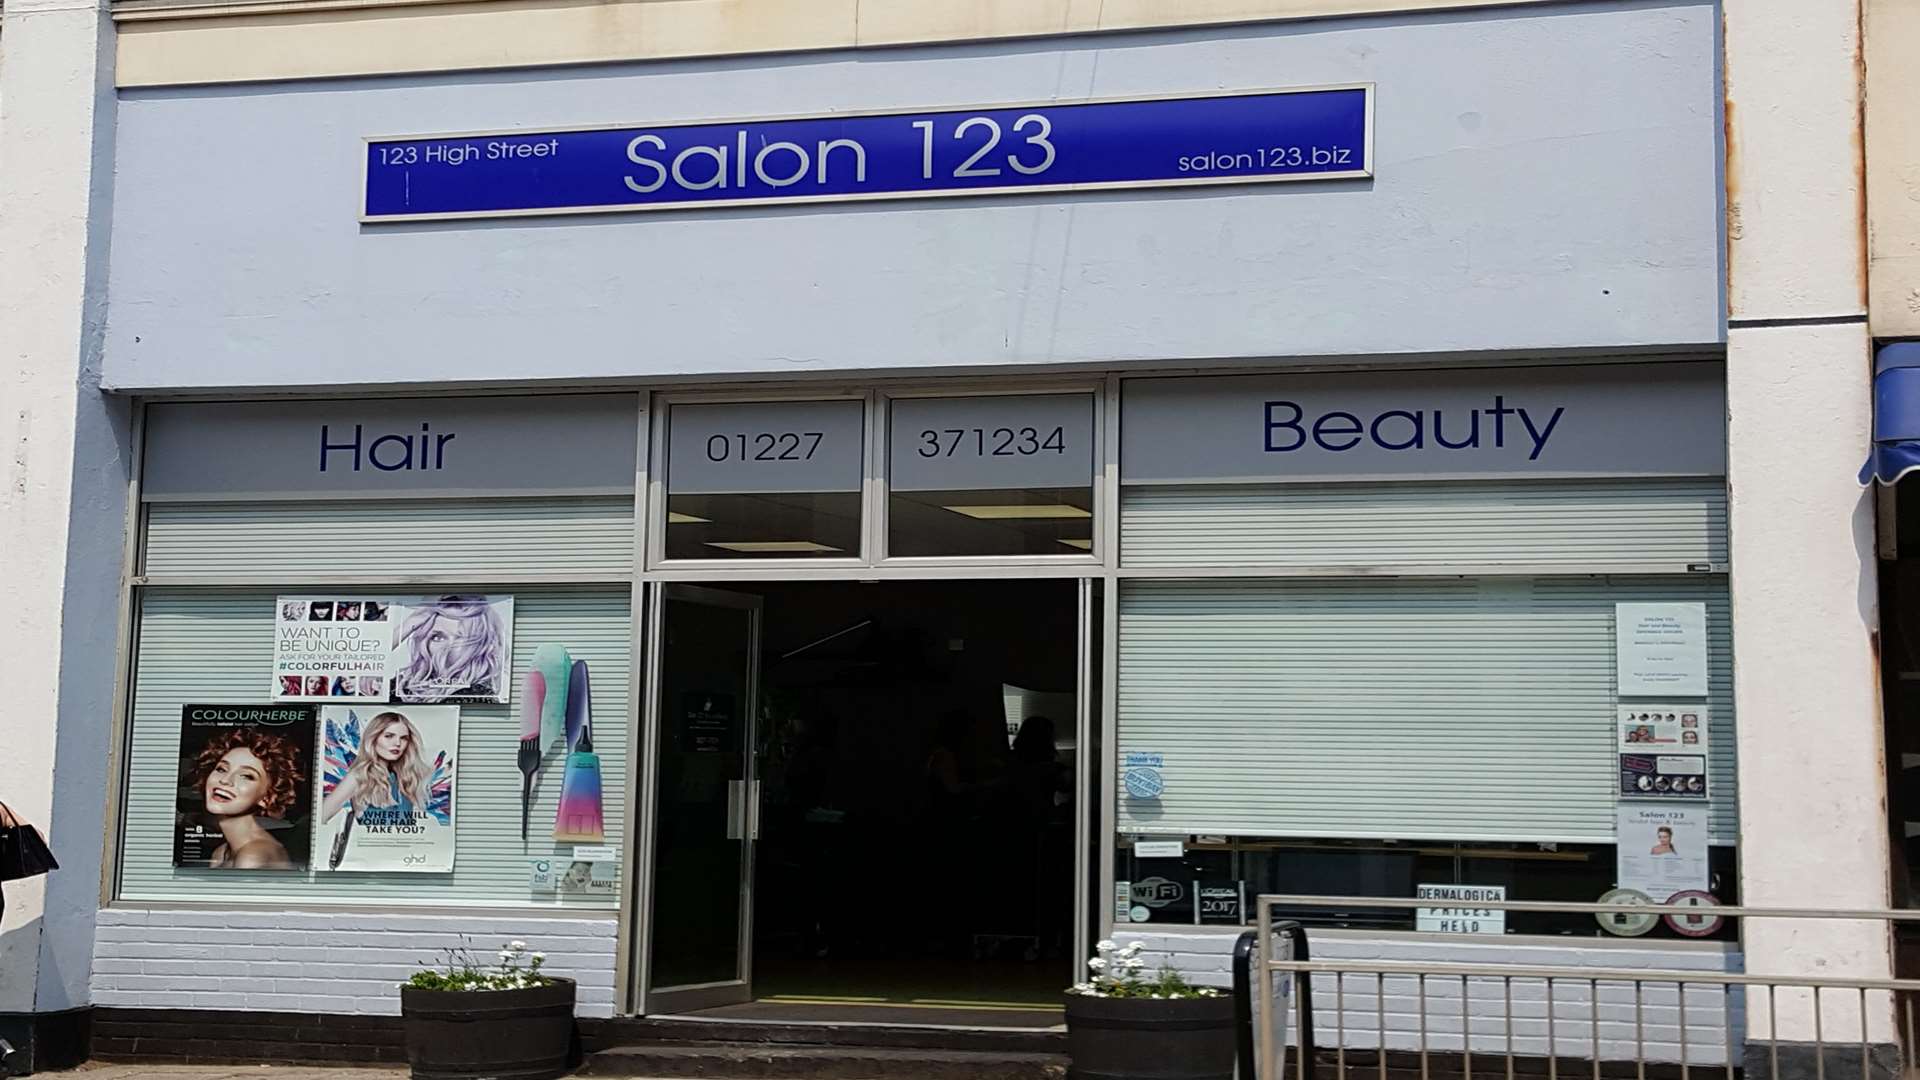 Police were called to Salon 123 in the High Street